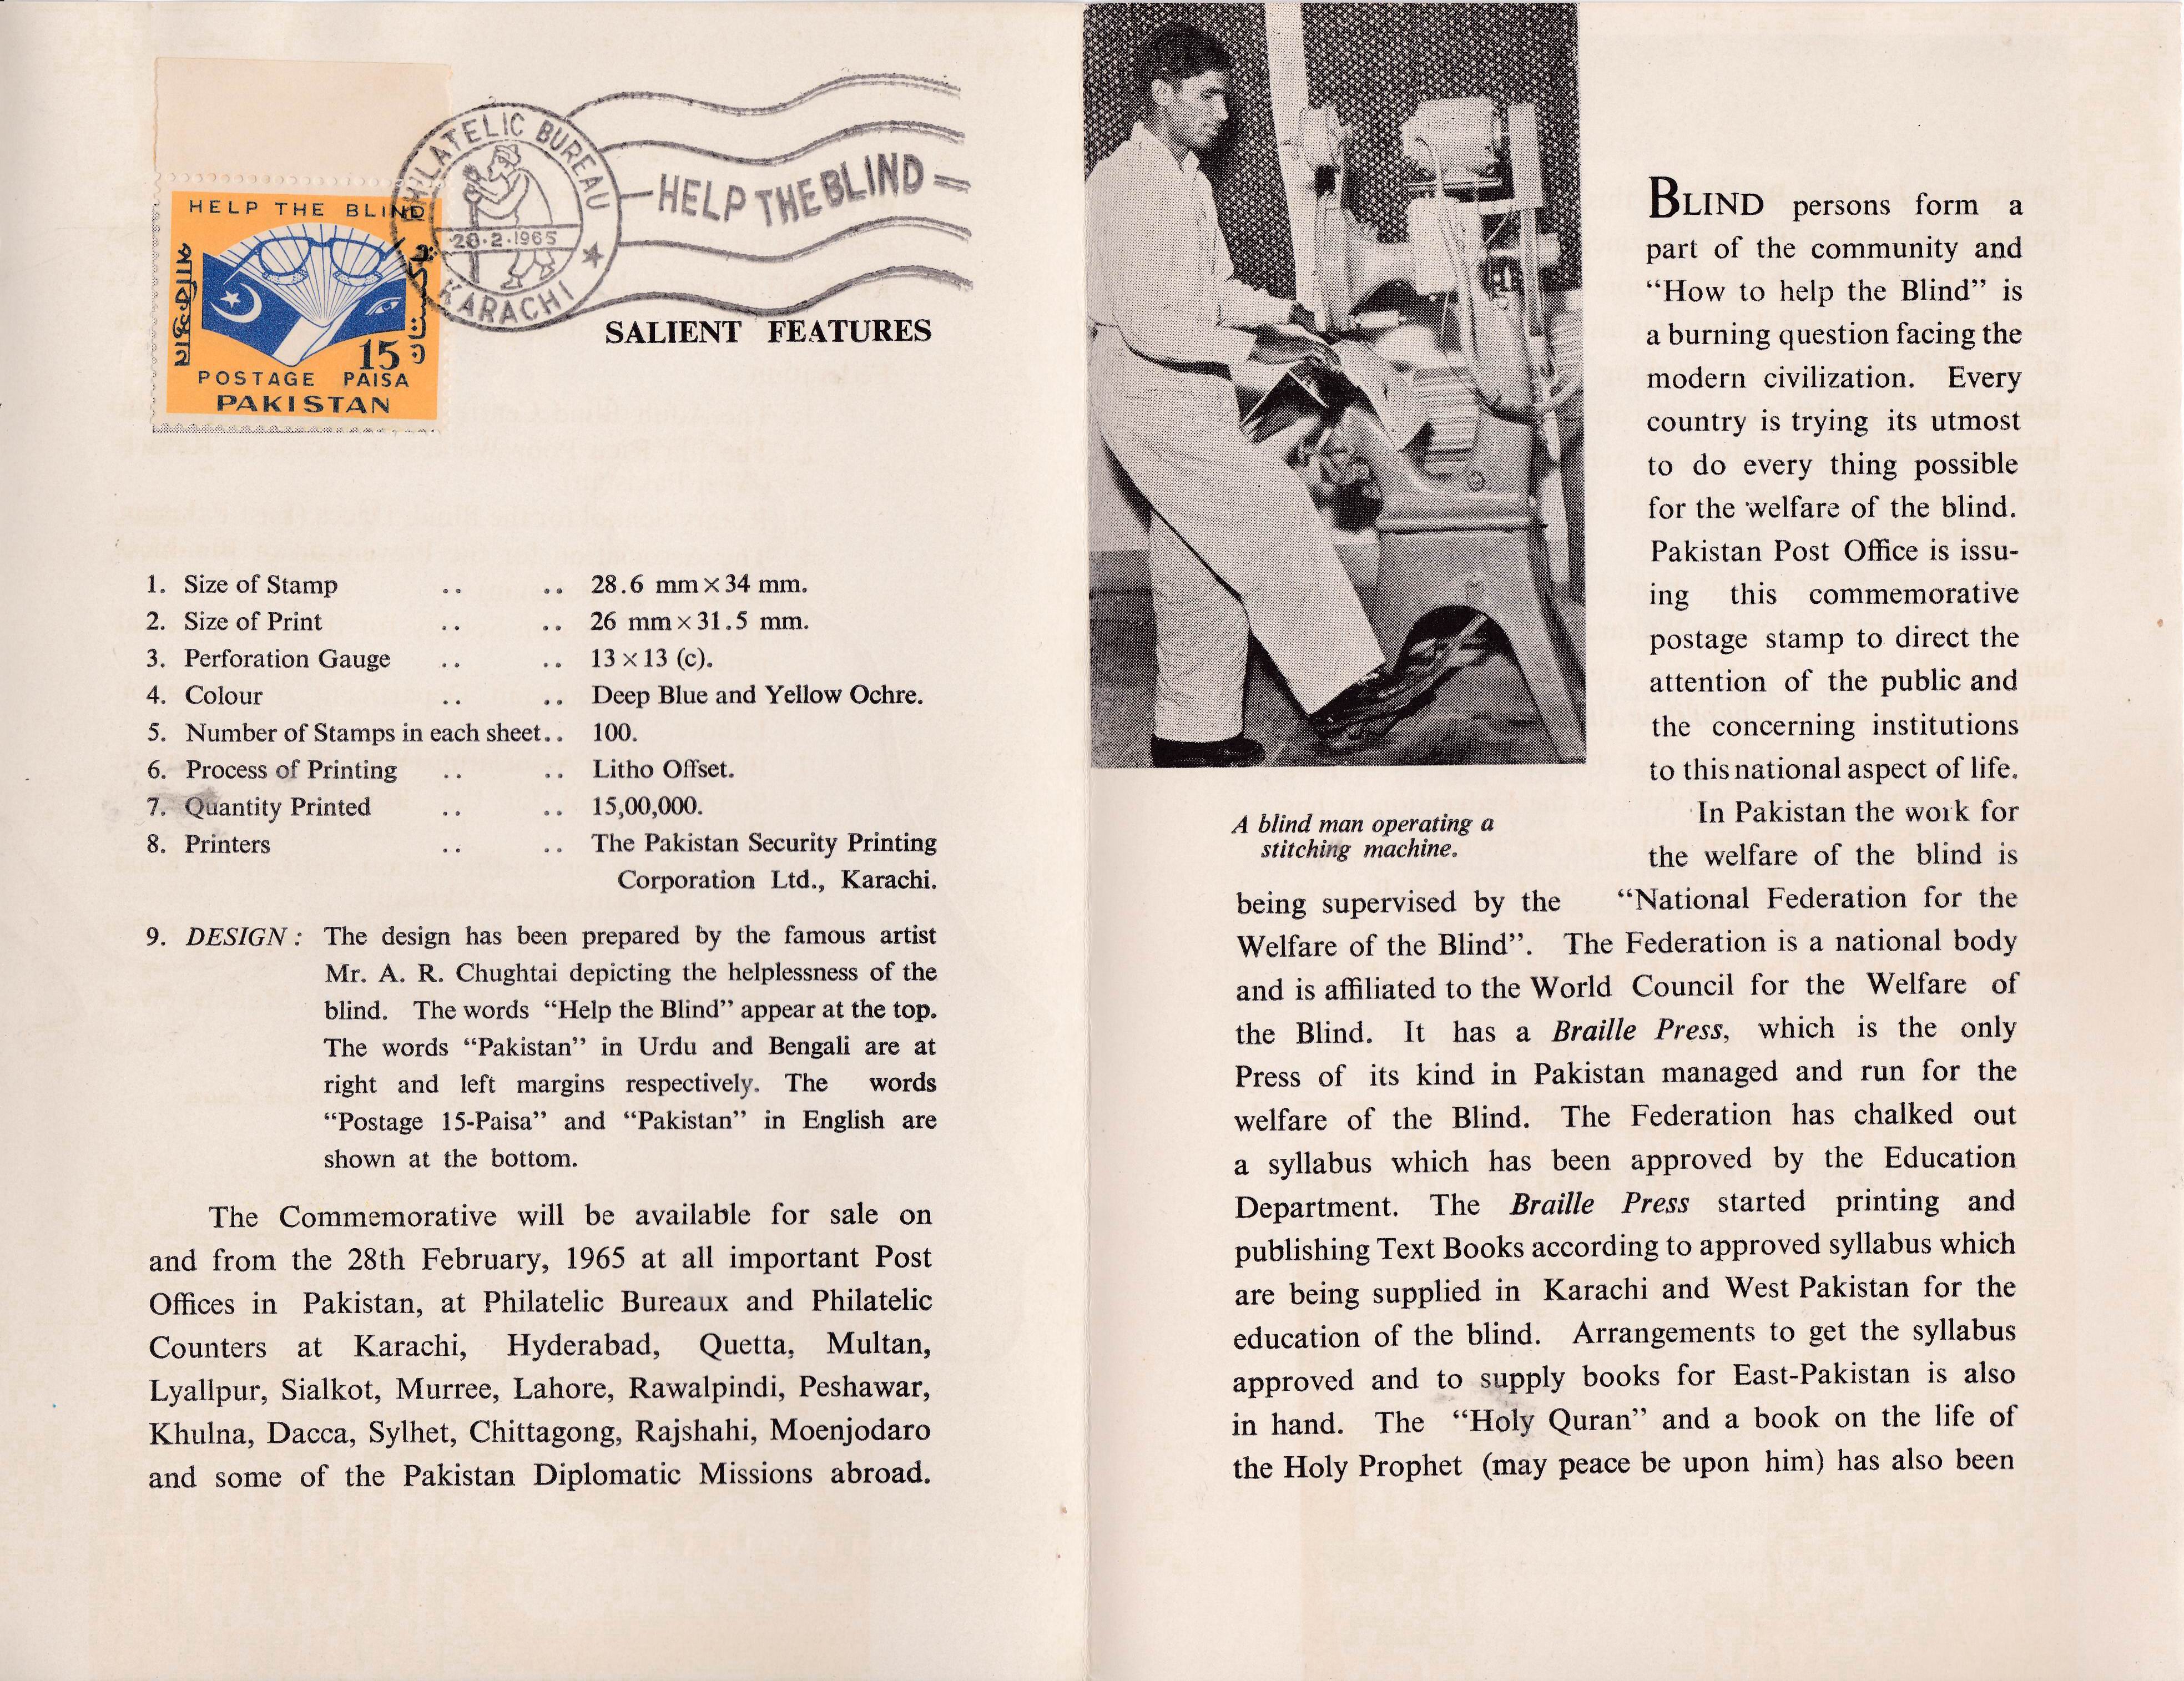 Pakistan Fdc 1965 Brochure & Stamp Help the Blind - Click Image to Close